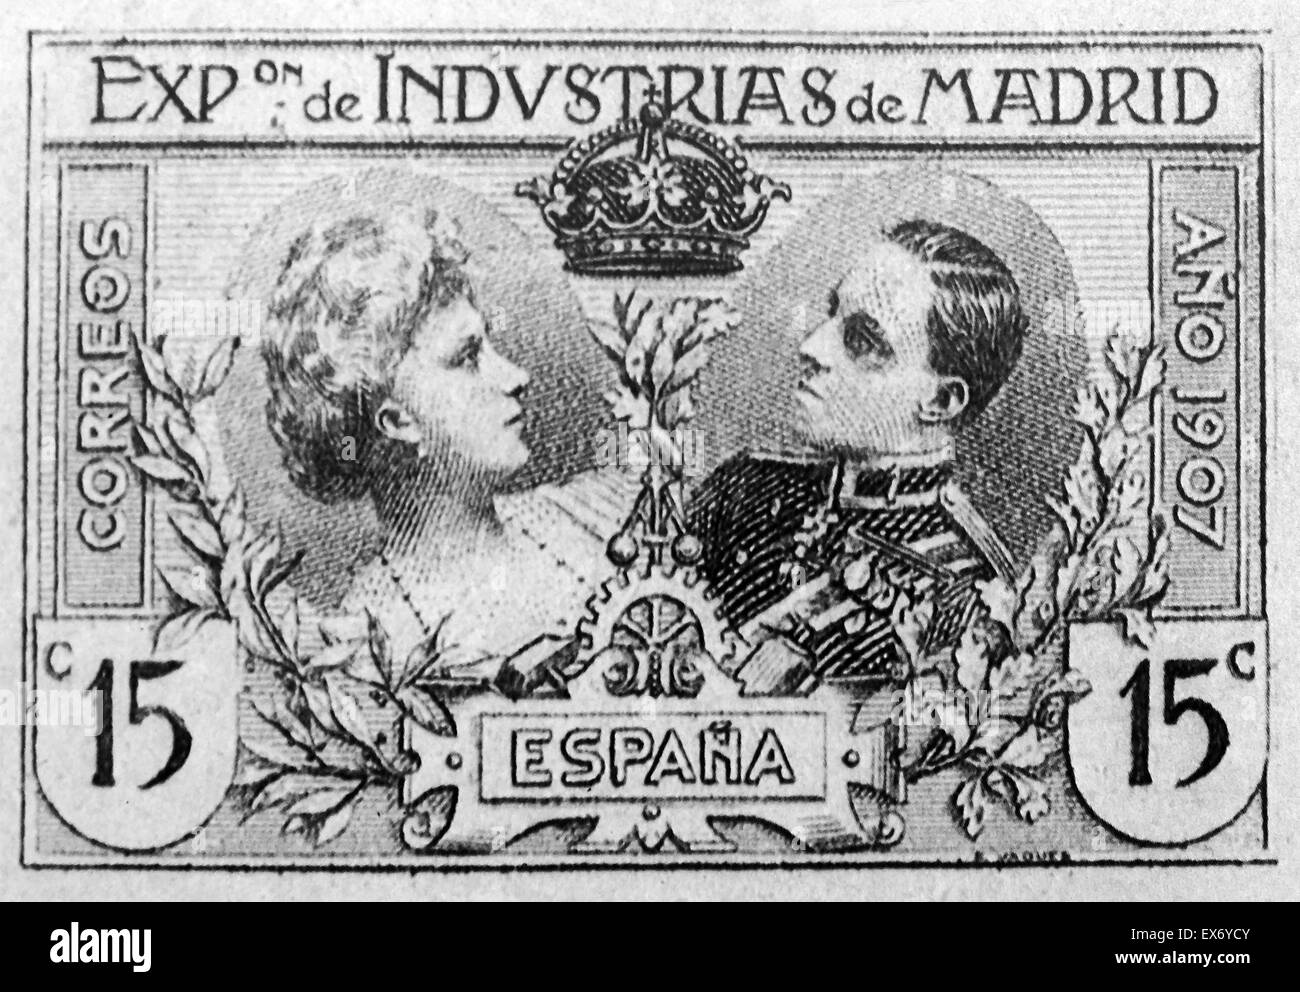 Stamp to mark the Exposition of Industry in Madrid depicting Queen Victoria Eugenie and Alfonso XIII , 1886 – 1941 King of Spain from 1886 until 1931. Stock Photo